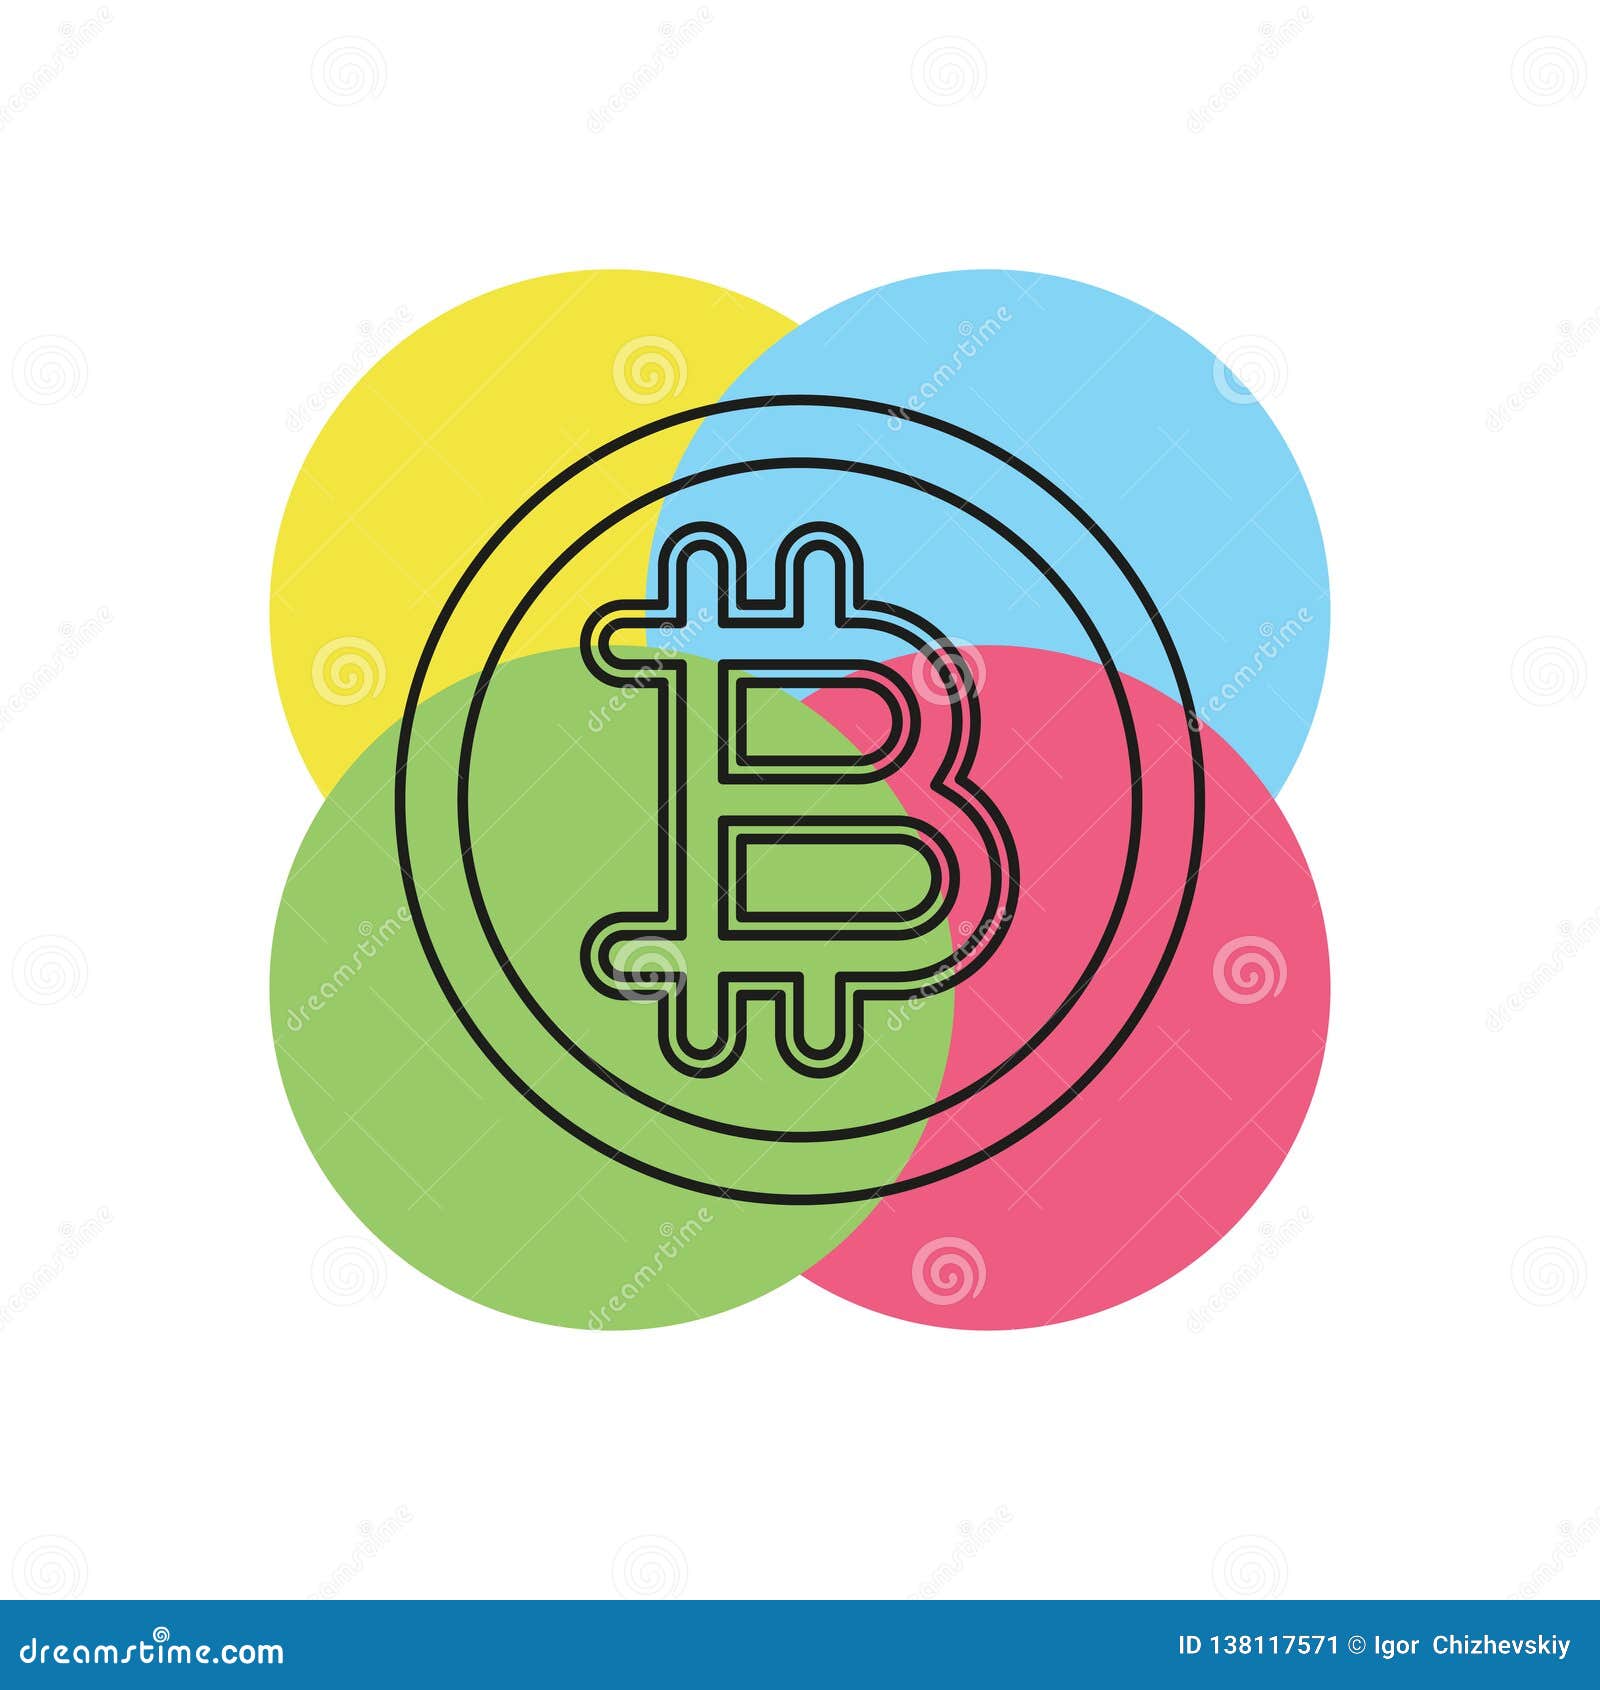 What is symbol for bitcoin cash основы криптобиткоин